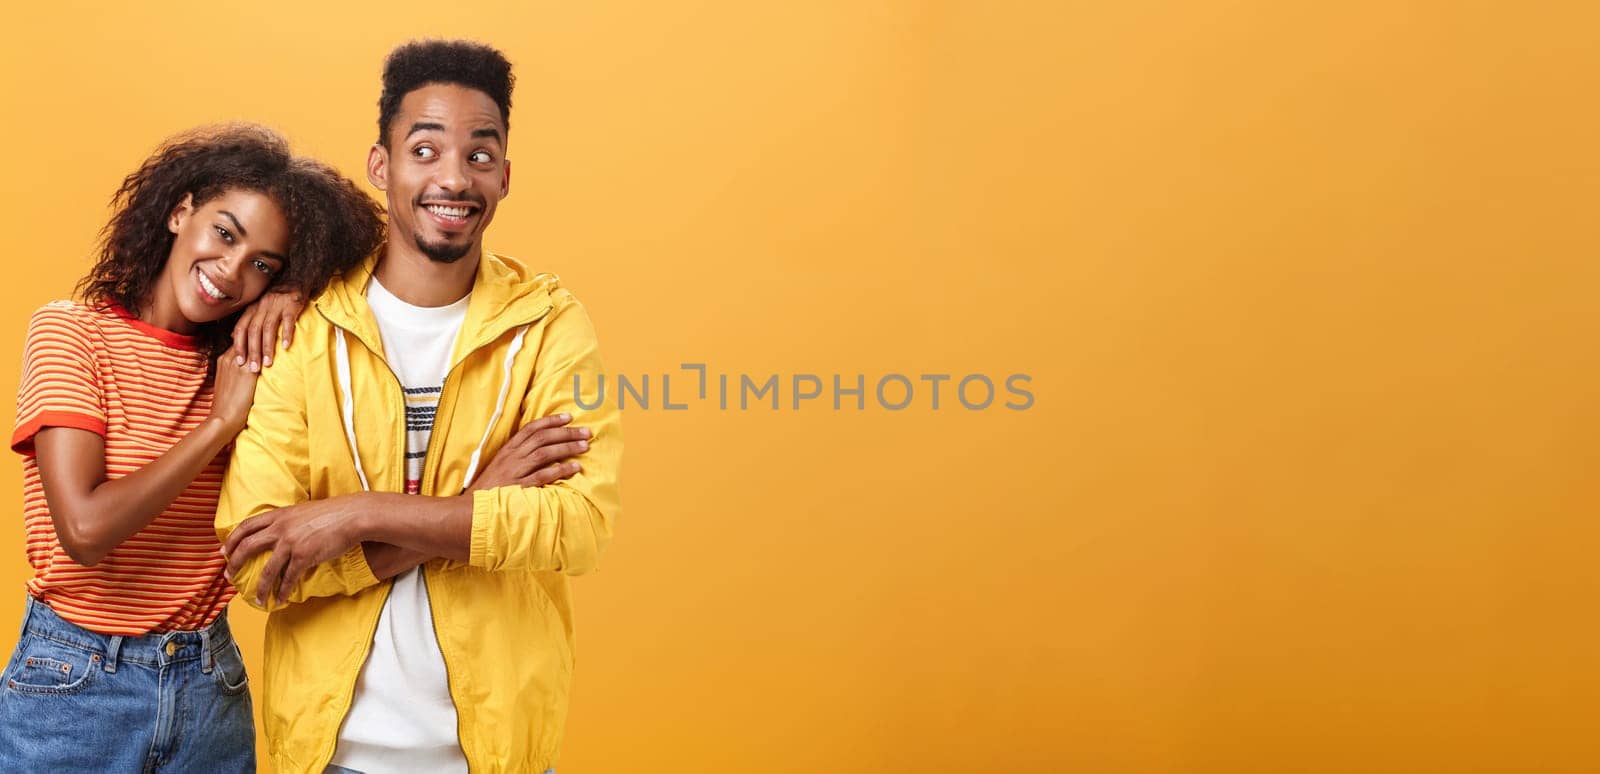 Guy feeling happy girl lean on his shoulder grinning and chuckling from happiness standing pleased and joyful over orange background while woman hugging best friend upbeat she can rely on him. Relationship concept